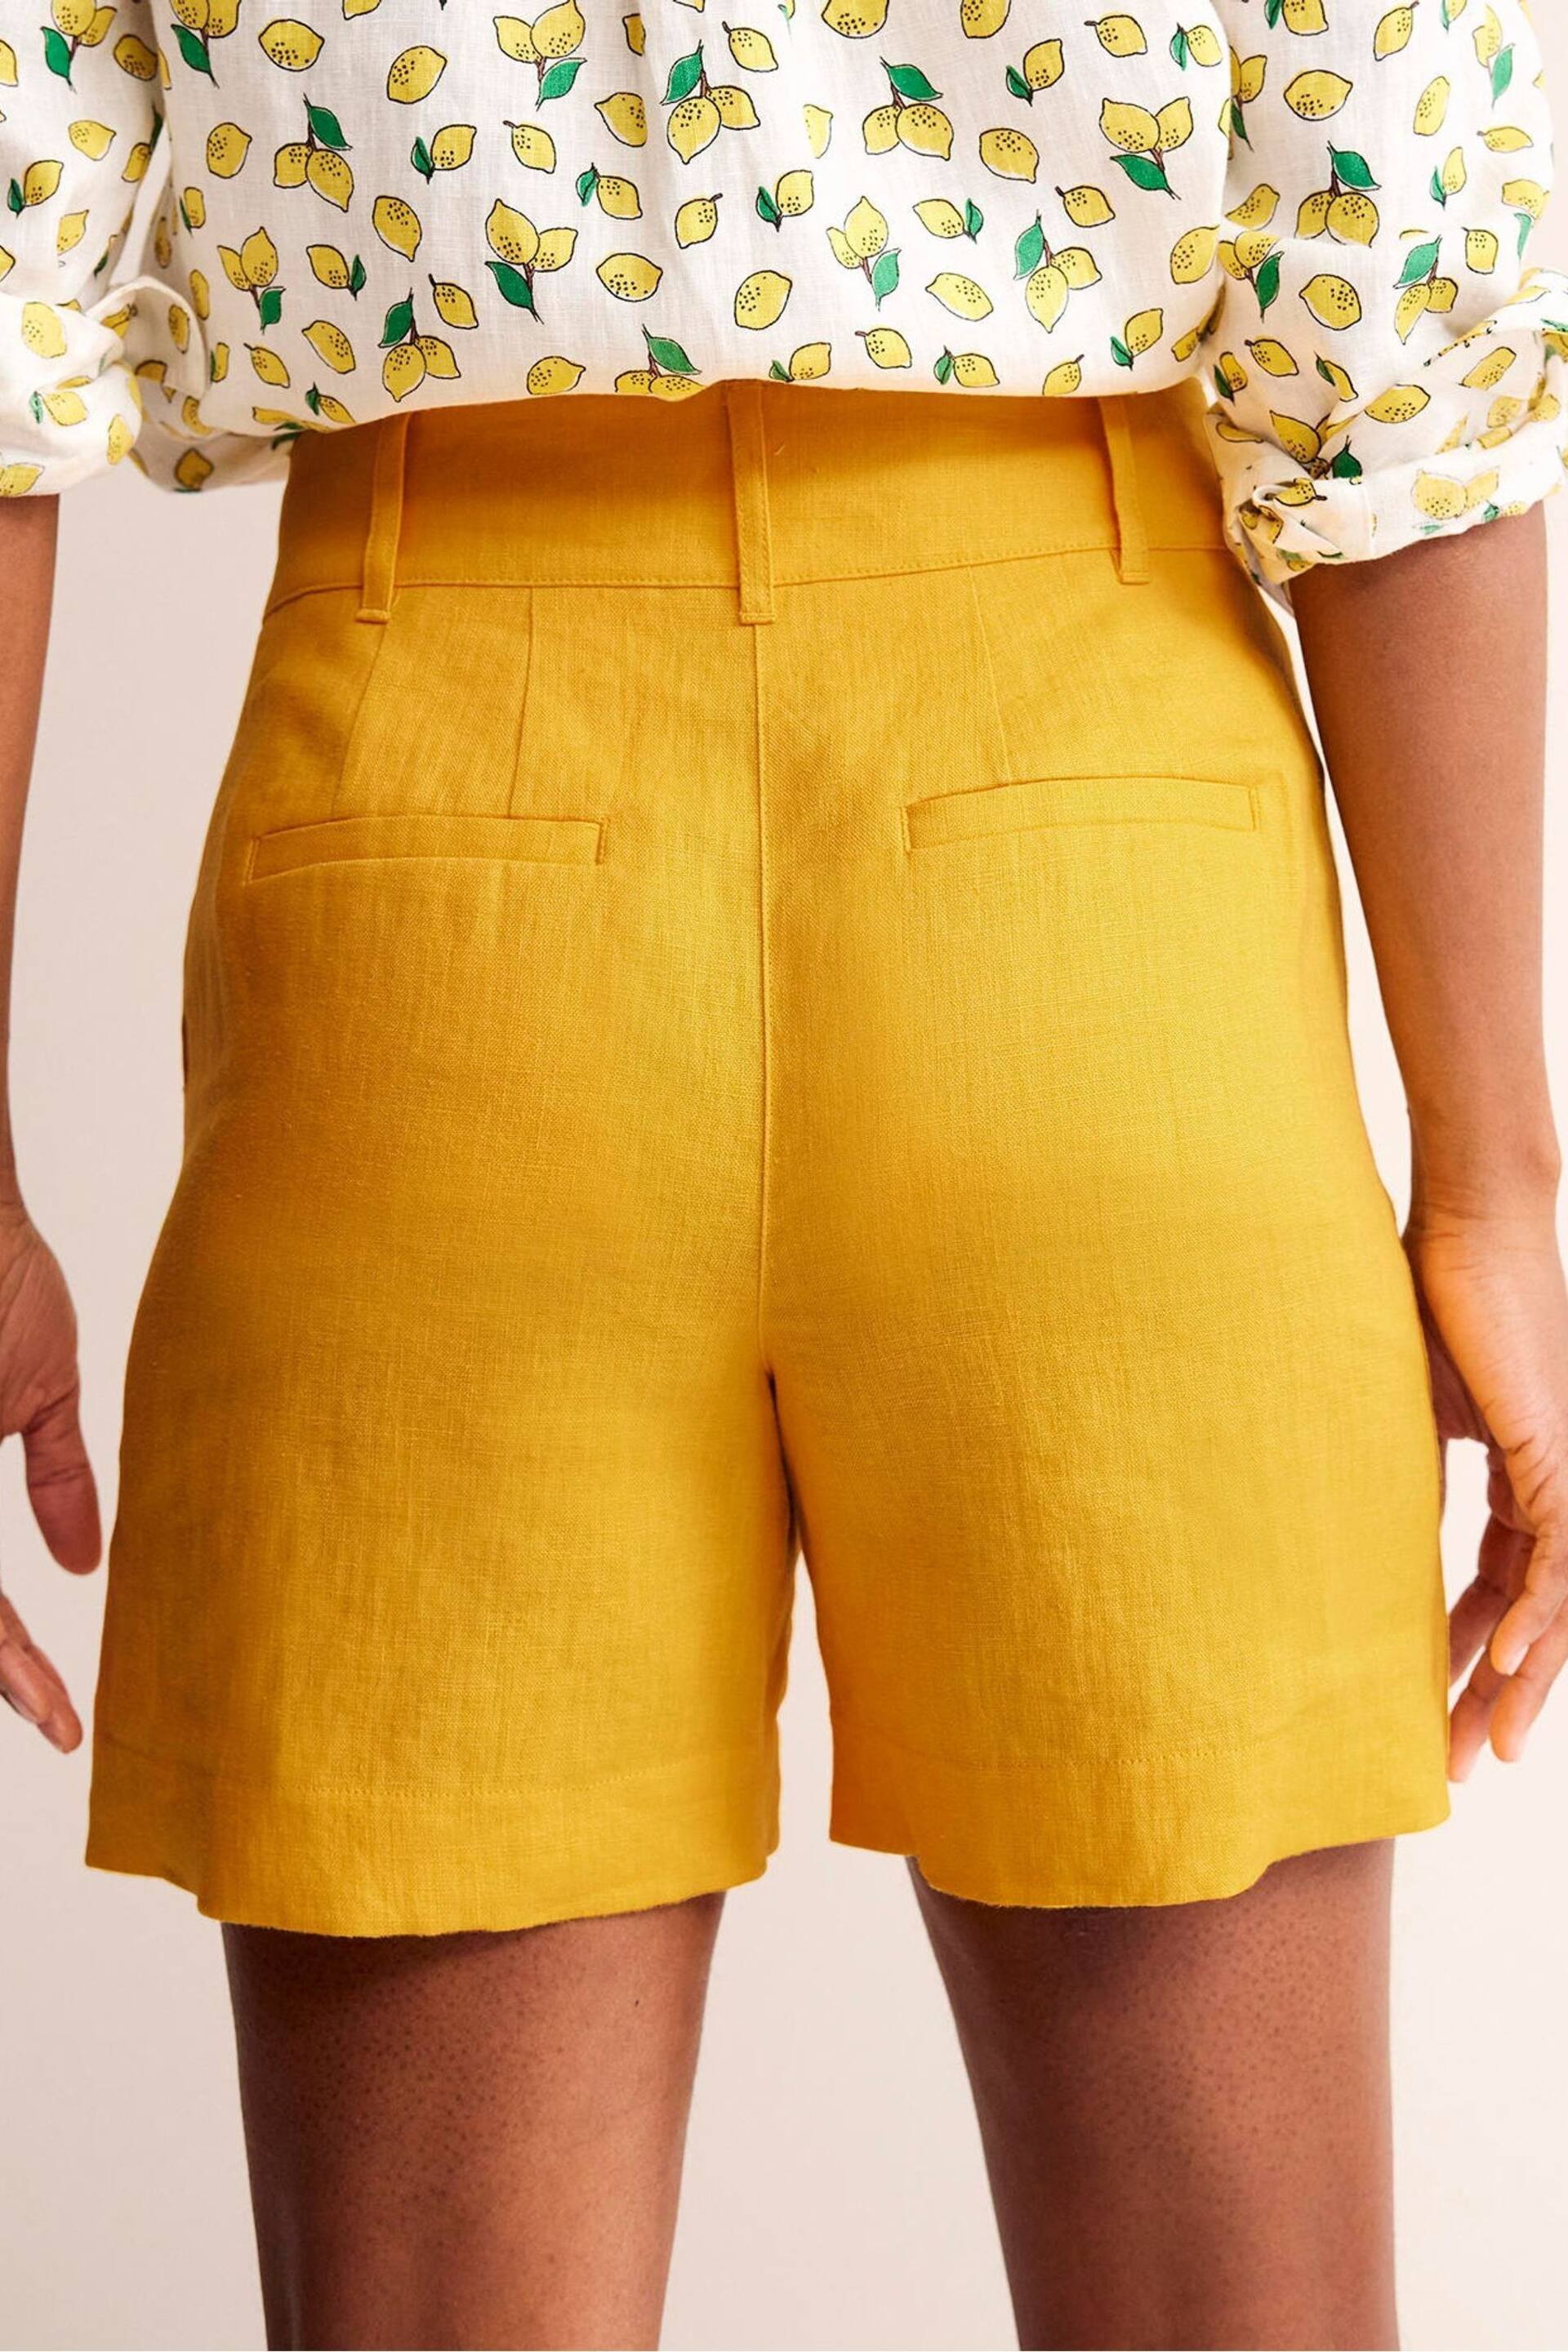 Boden Yellow Westbourne Linen Shorts - Image 4 of 6